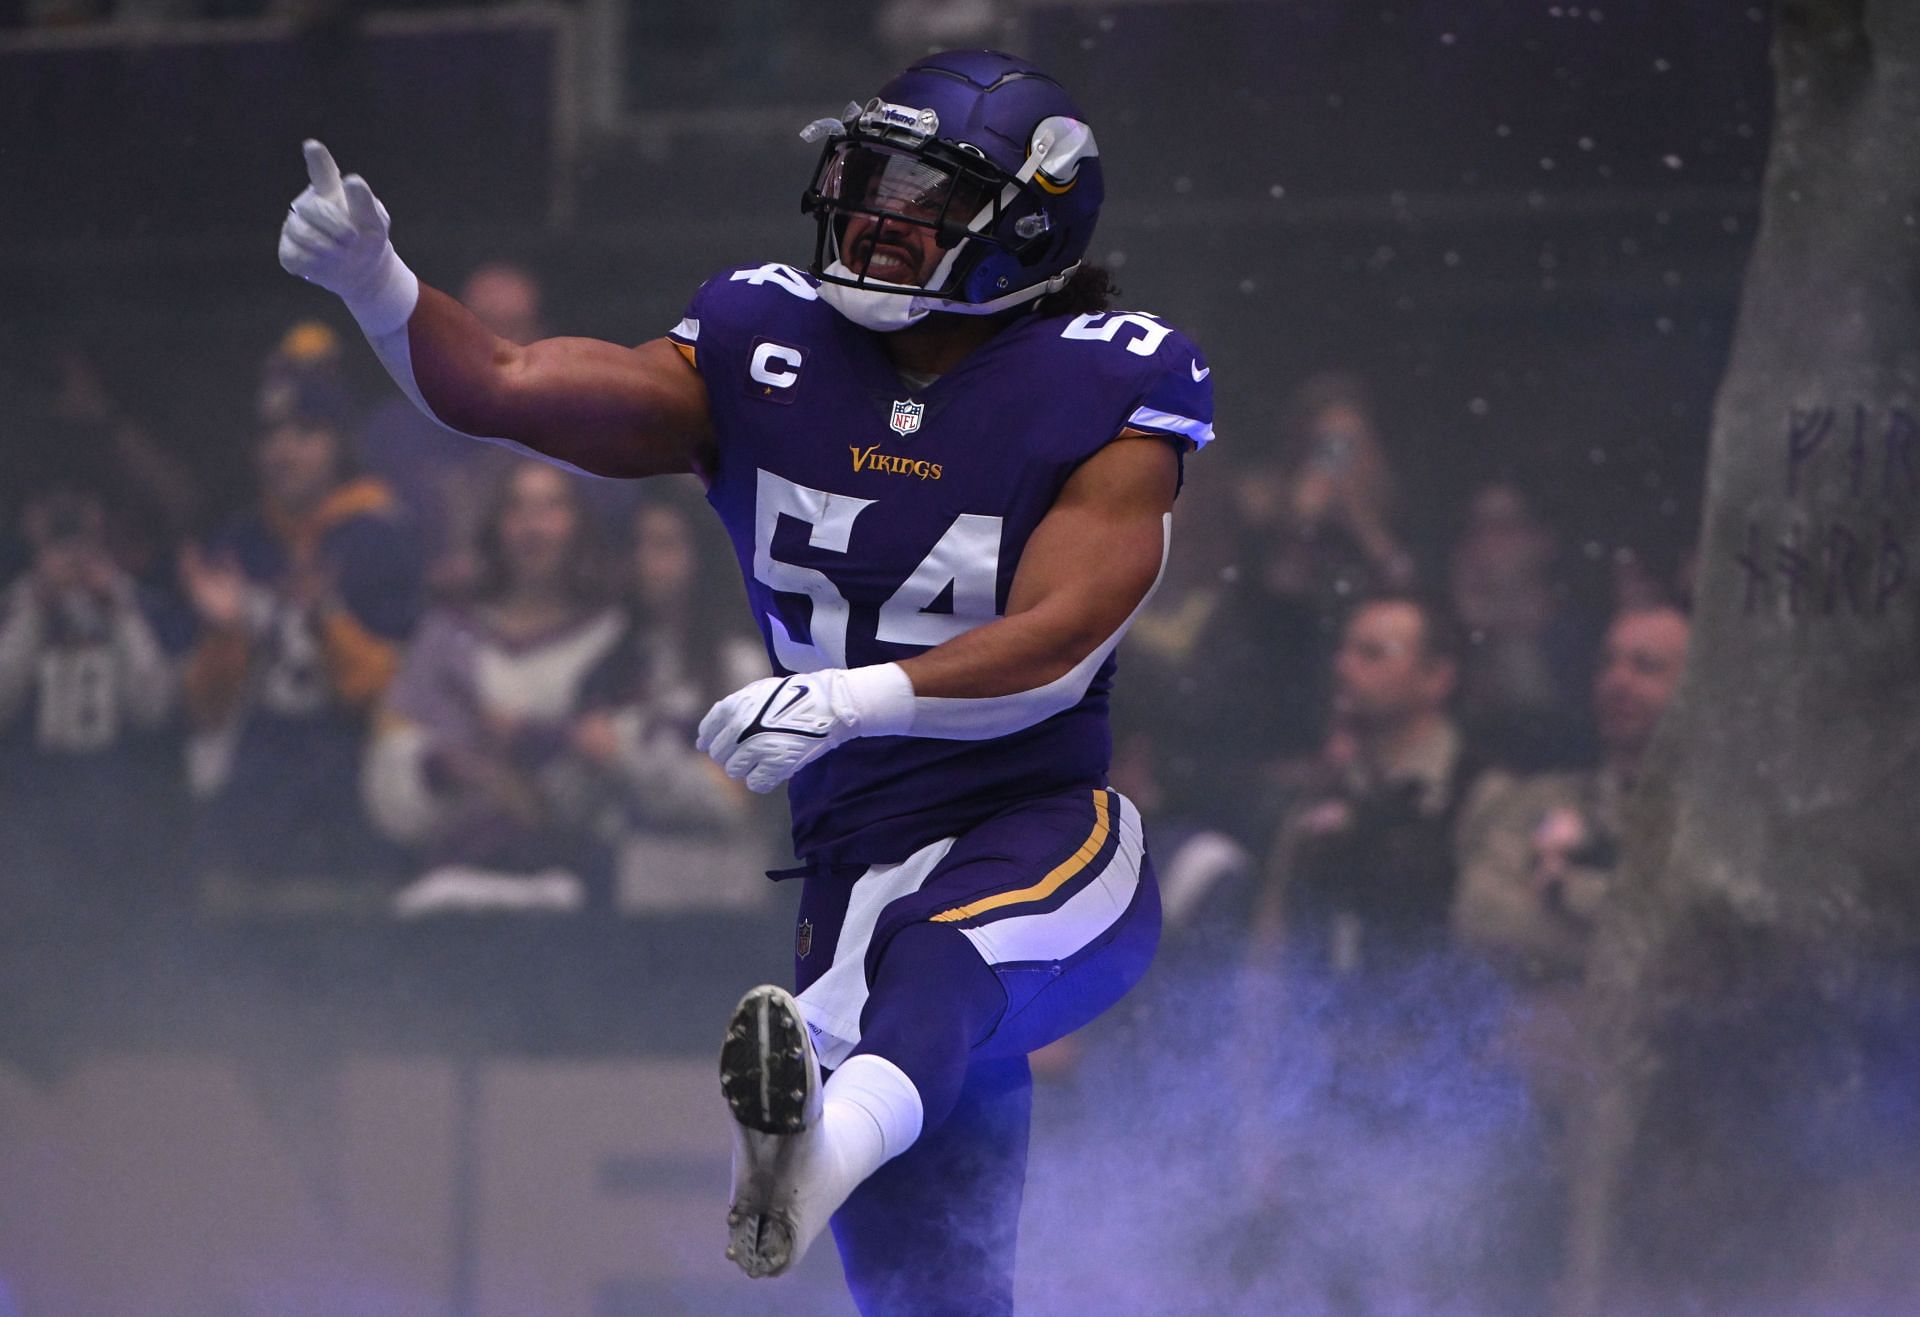 Eric Kendricks #54 of the Minnesota Vikings takes the field prior to the NFC Wild Card playoff game against the New York Giants